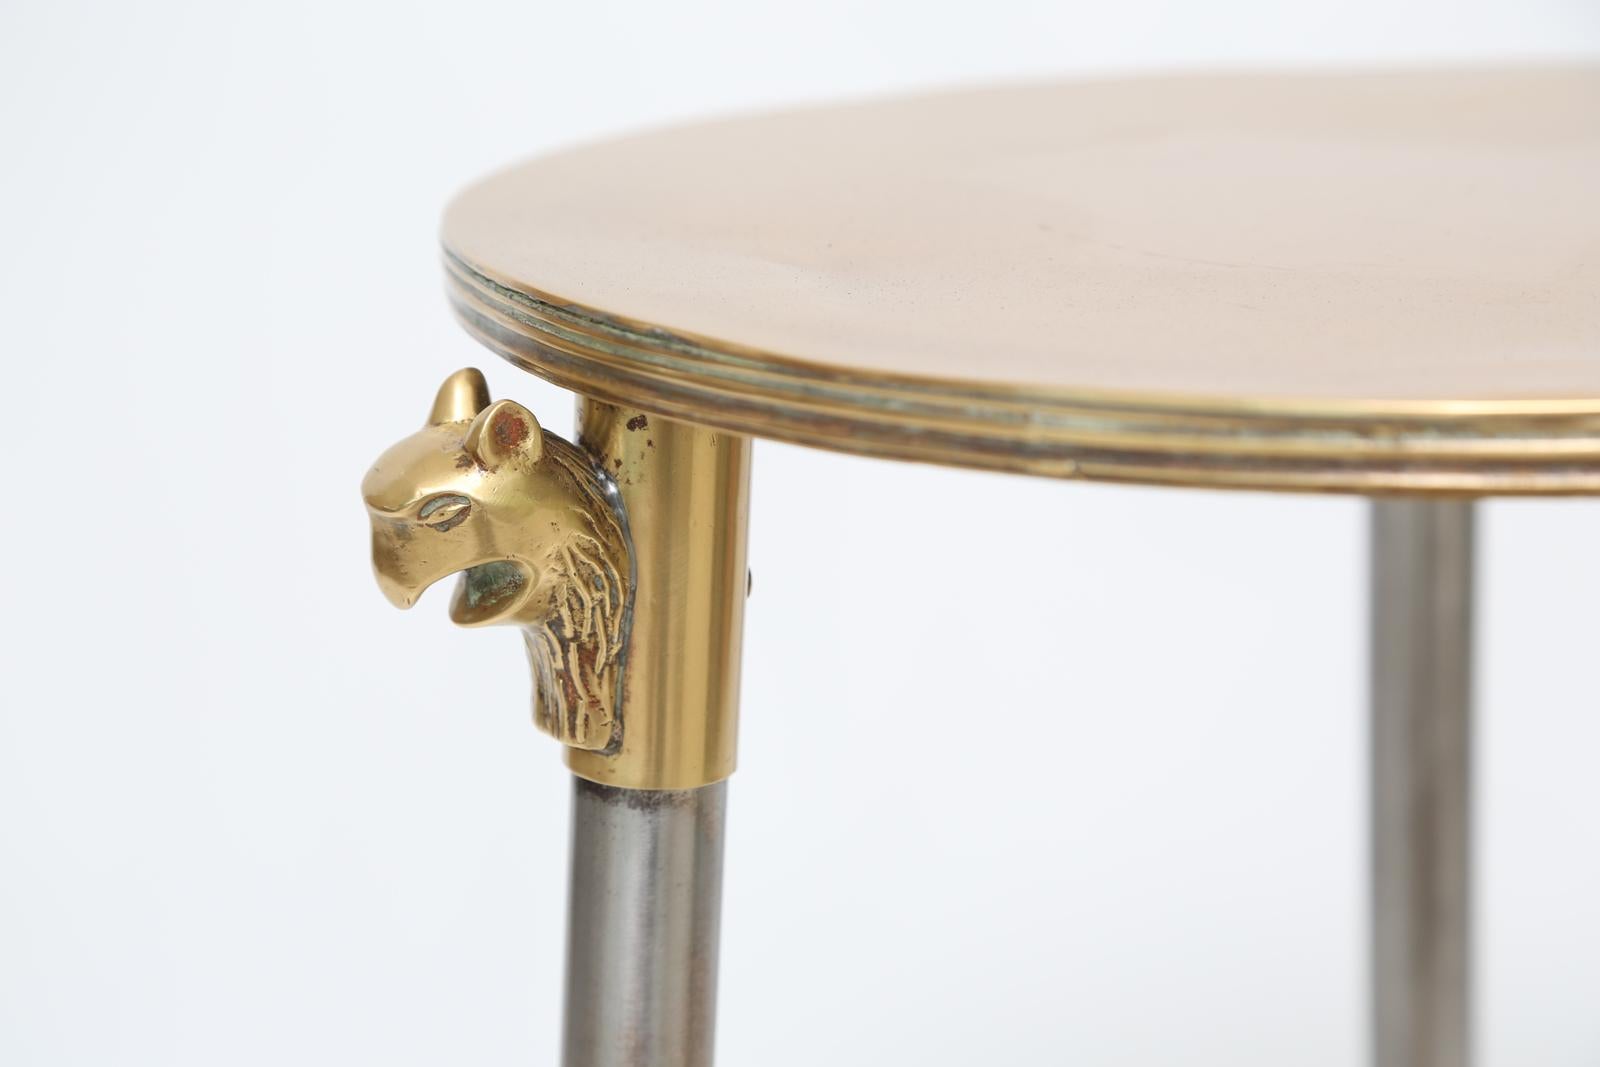 Candlestand side table, of polished brass and steel, having a round top, raised on a trio of panther-headed, round legs, joined by a shelf stretcher with concave sides, ending in feet fashioned as tassels. 

The circular top measures 13.25